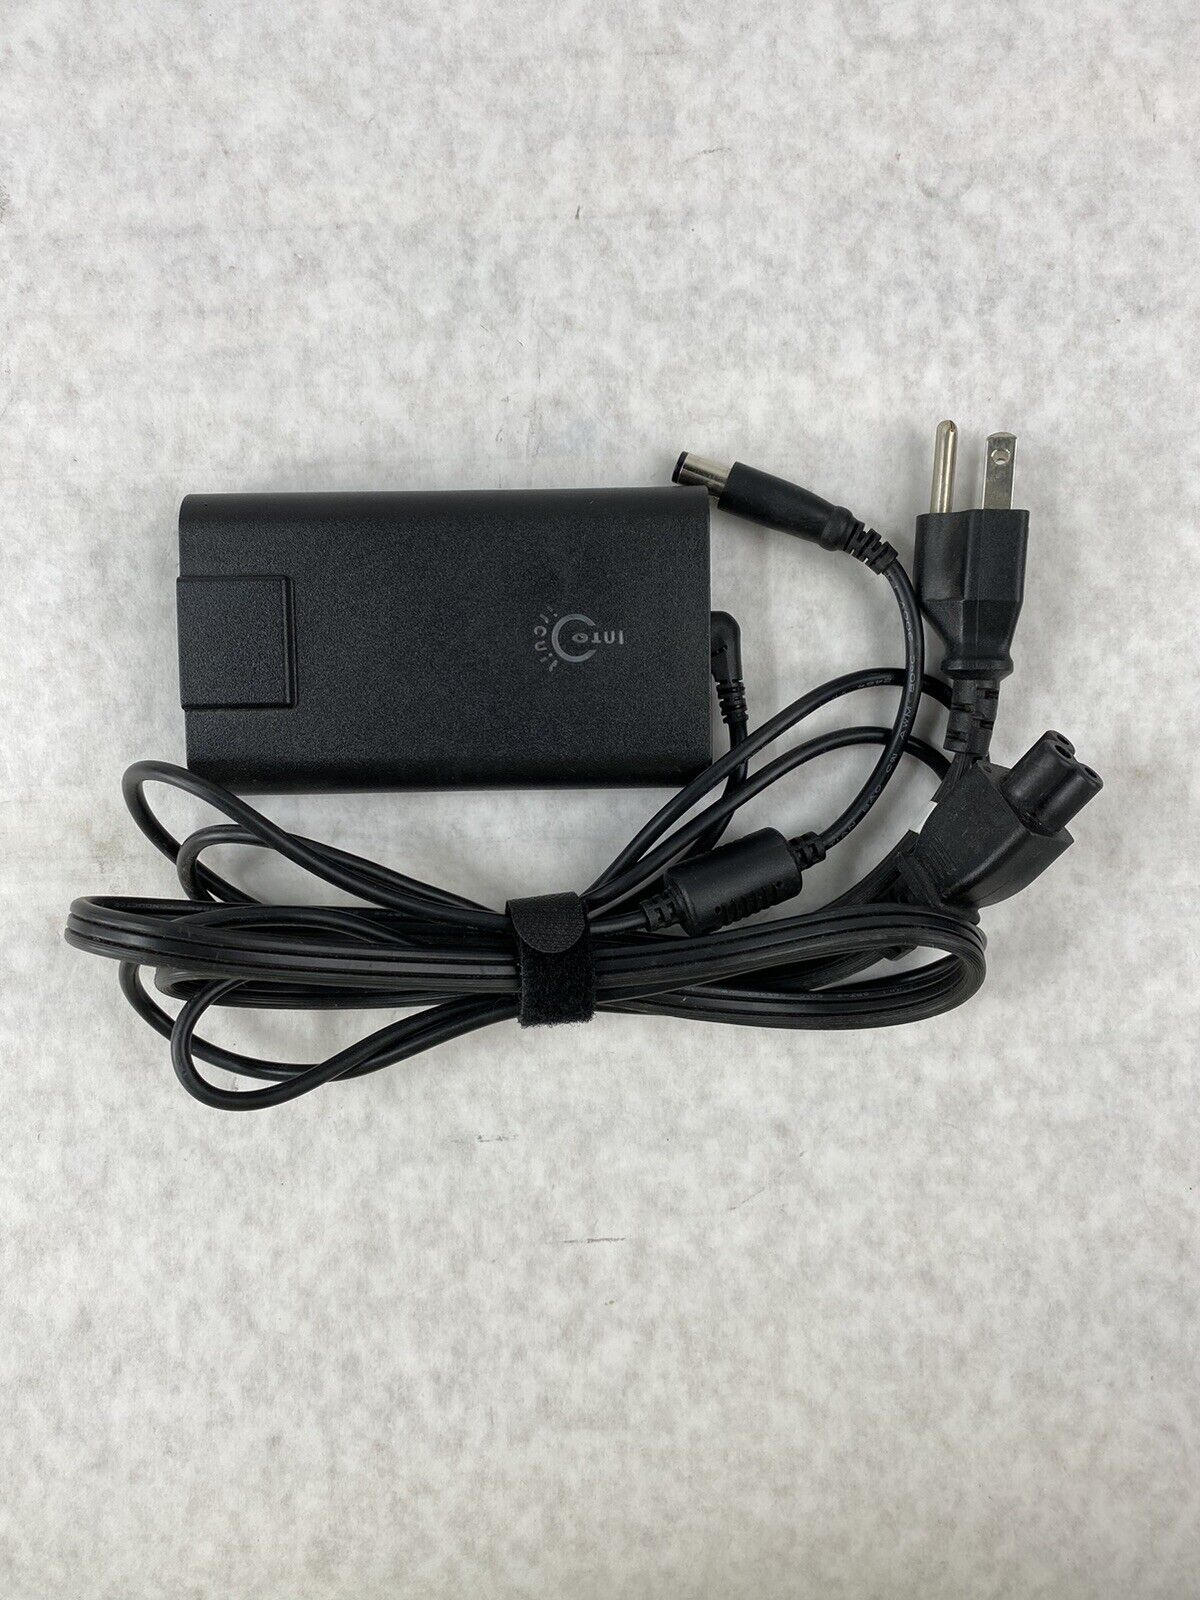 Into Circuit PPP009L 18.5V 3.5A AC Adapter